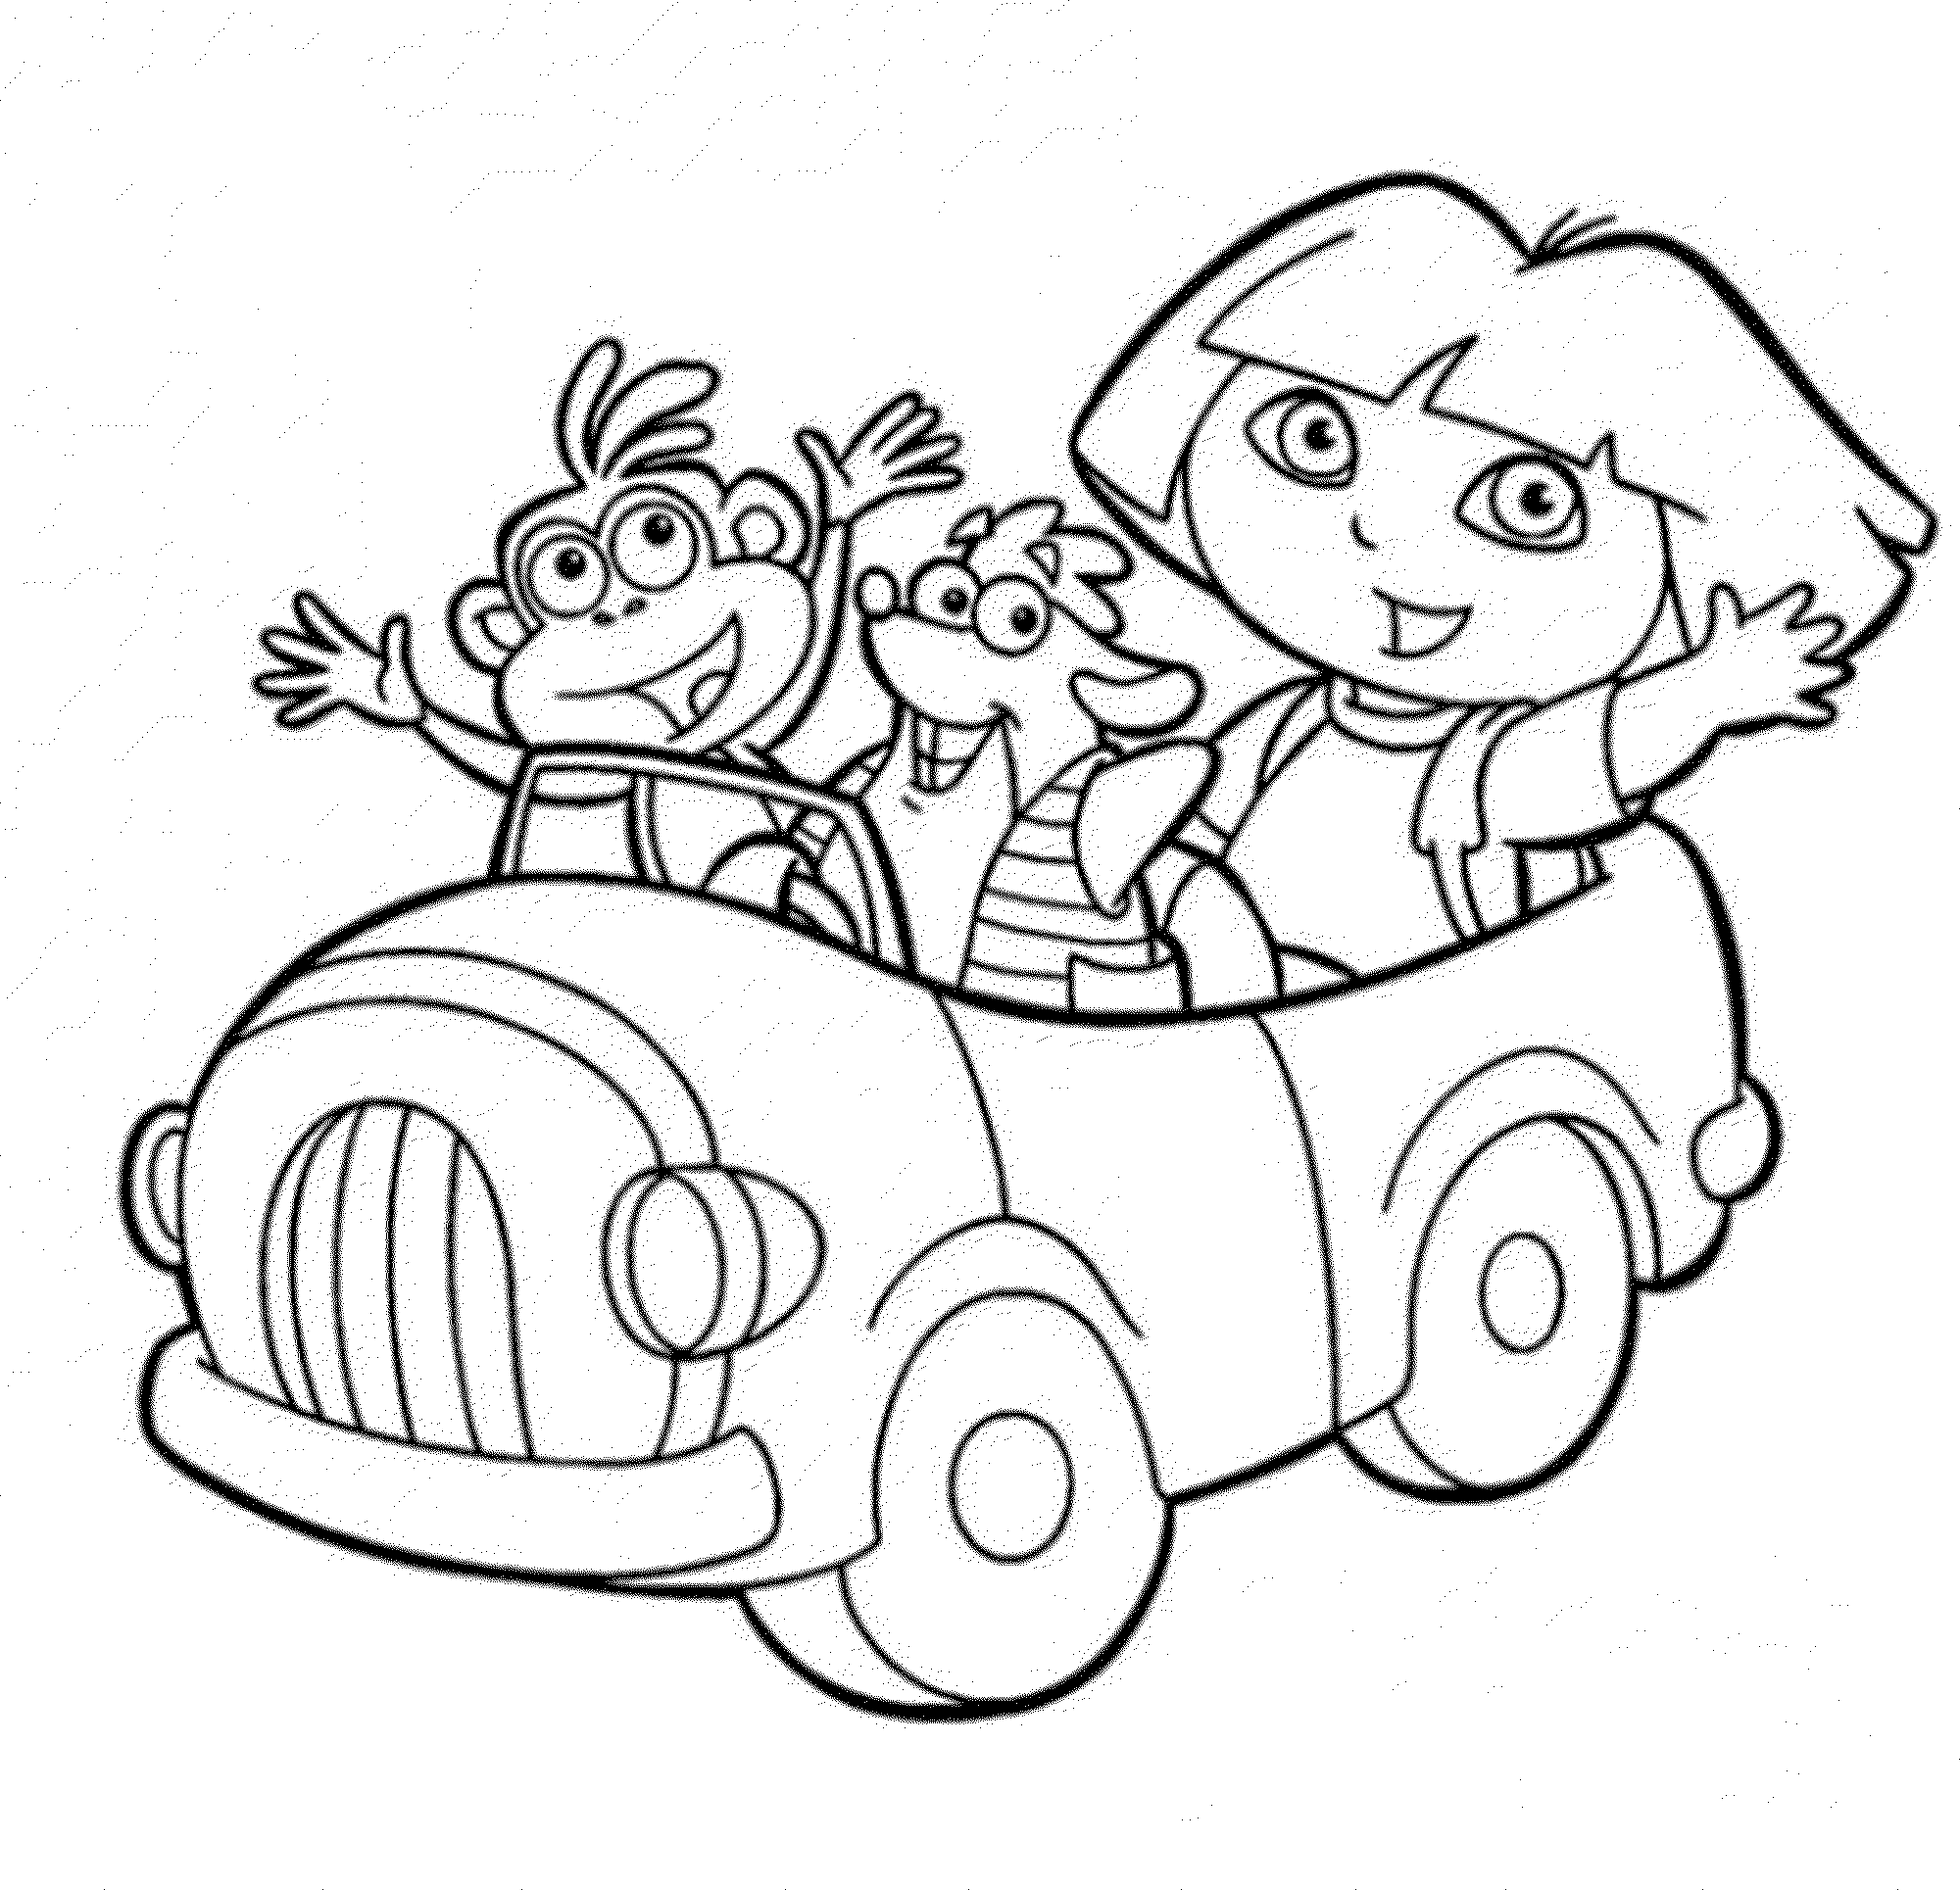 Dora Coloring Pages - FREE Printable Coloring Pages | AngelDesign